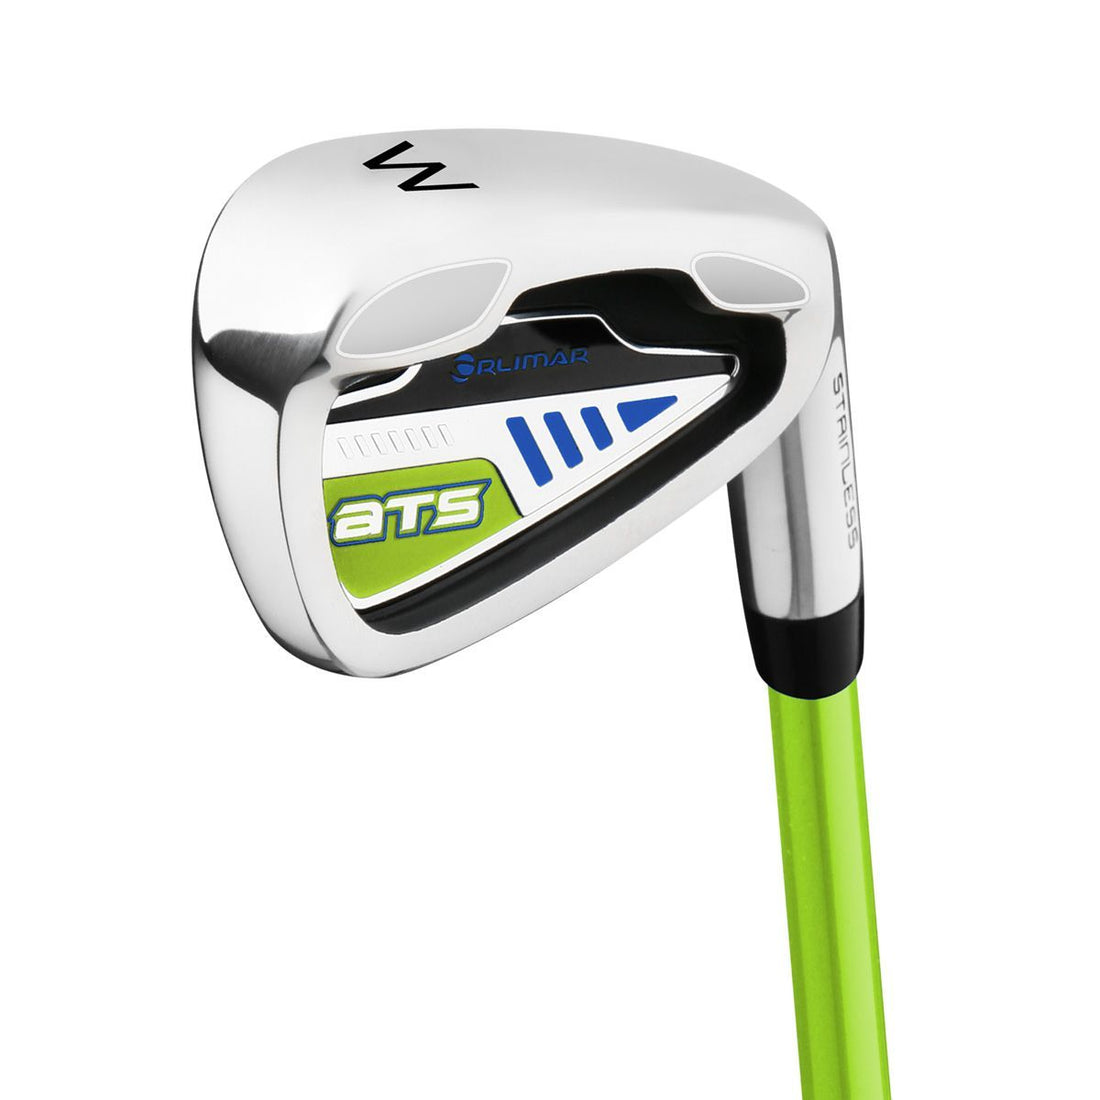 angled cavity back view of an Orlimar ATS Junior Lime/Blue Series pitching wedge